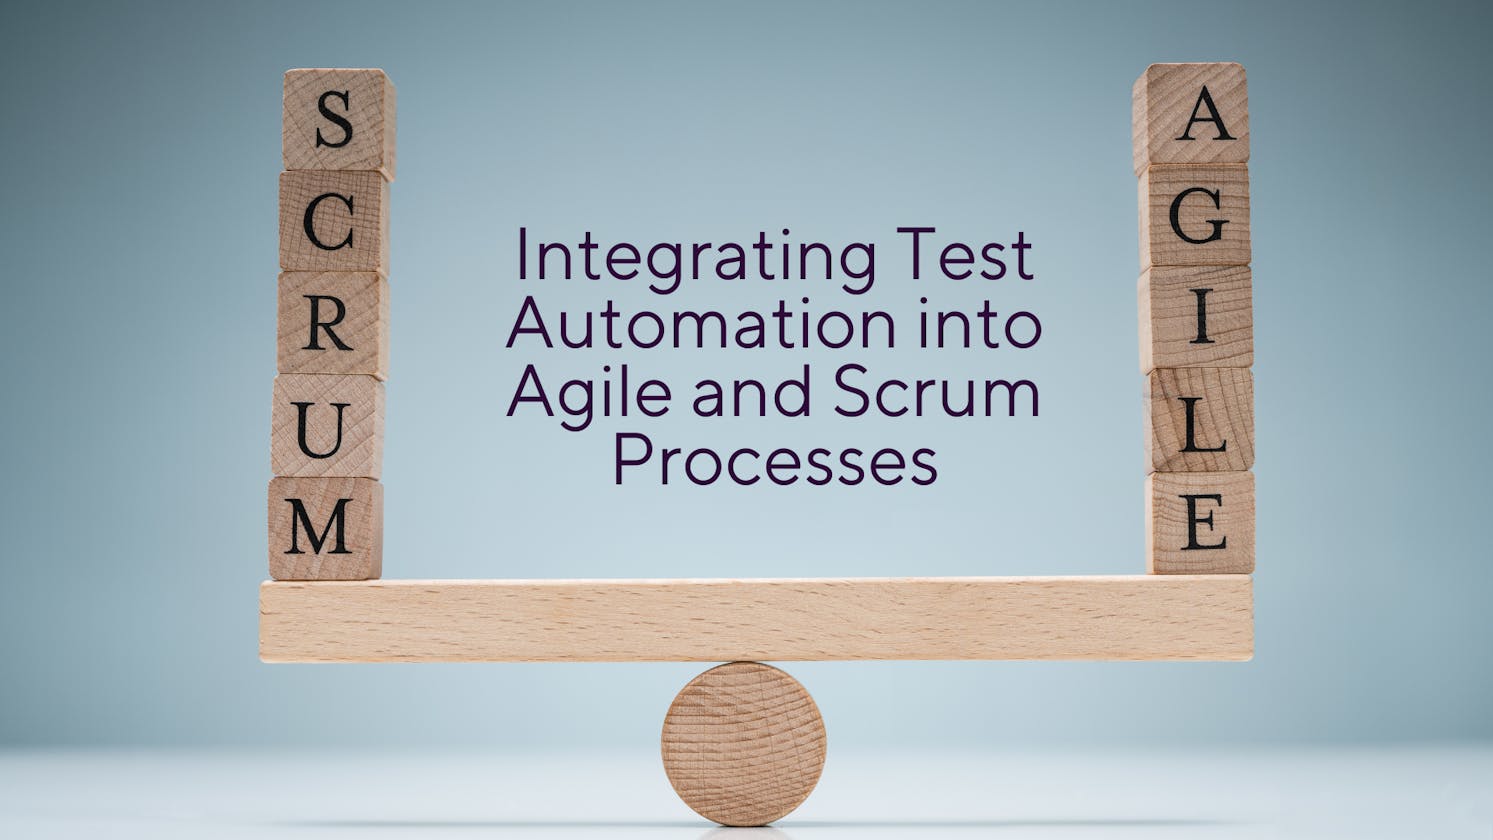 Integrating Test Automation into Agile and Scrum Processes